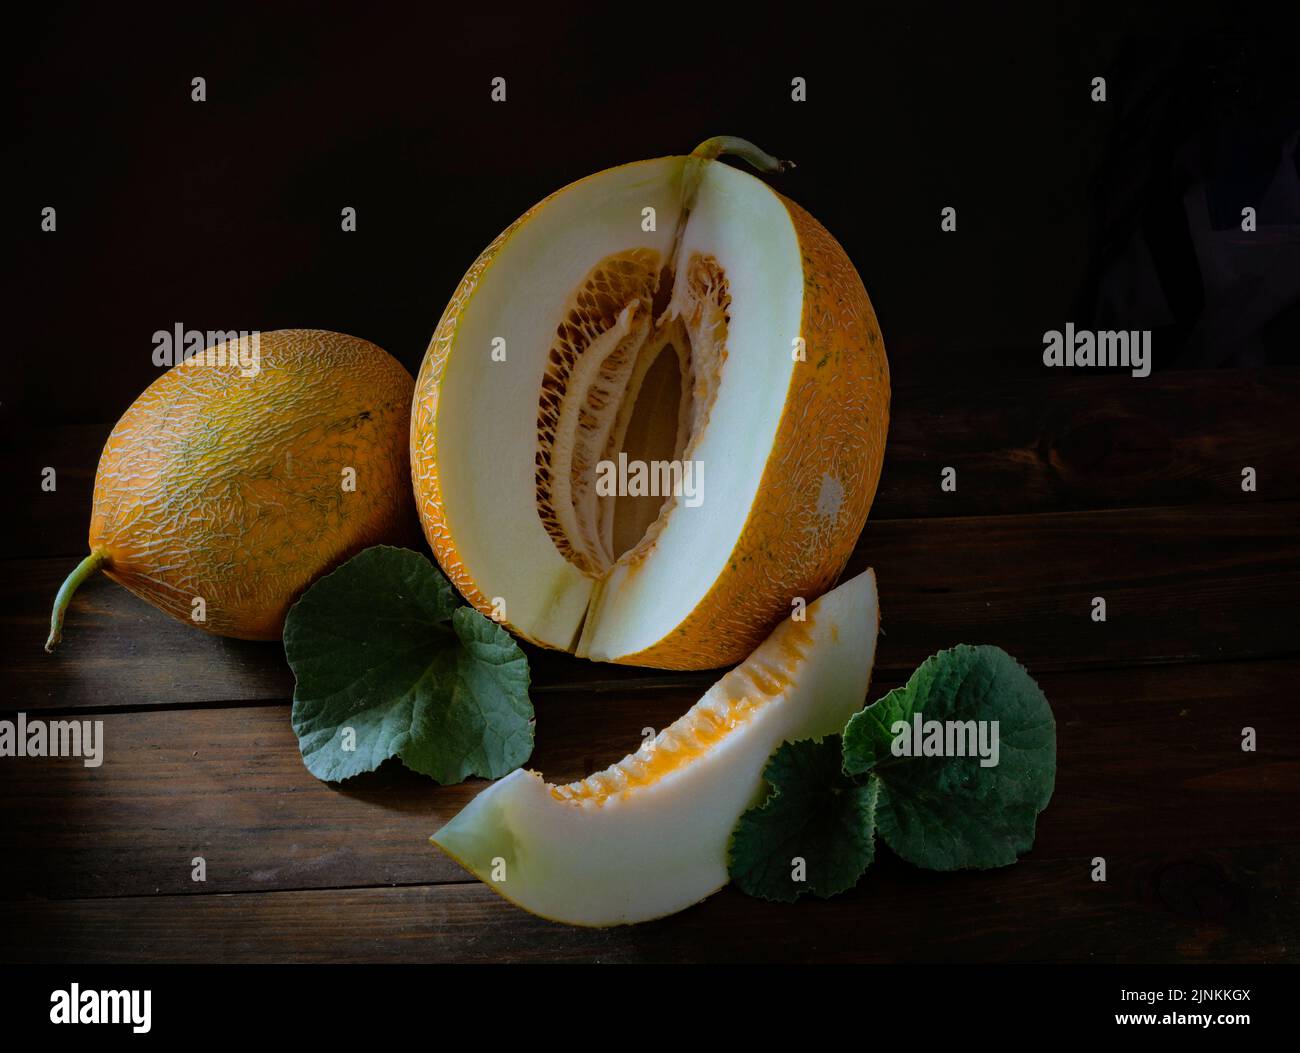 fresh Whole and sliced of Japanese melons, honey melon cantaloupe (Cucumis melo) leaf wooden table background. fruit summer Fruits healthcare concept. Stock Photo